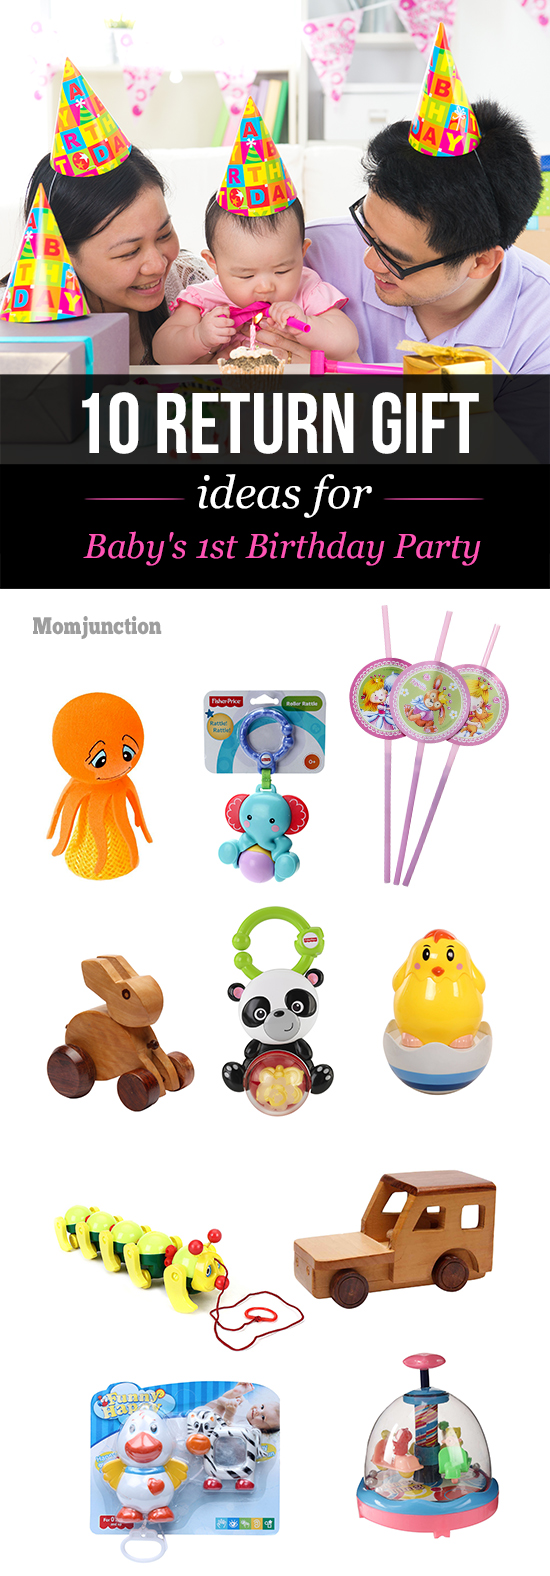 32 Thoughtful Return Gift Ideas For 1st Birthday